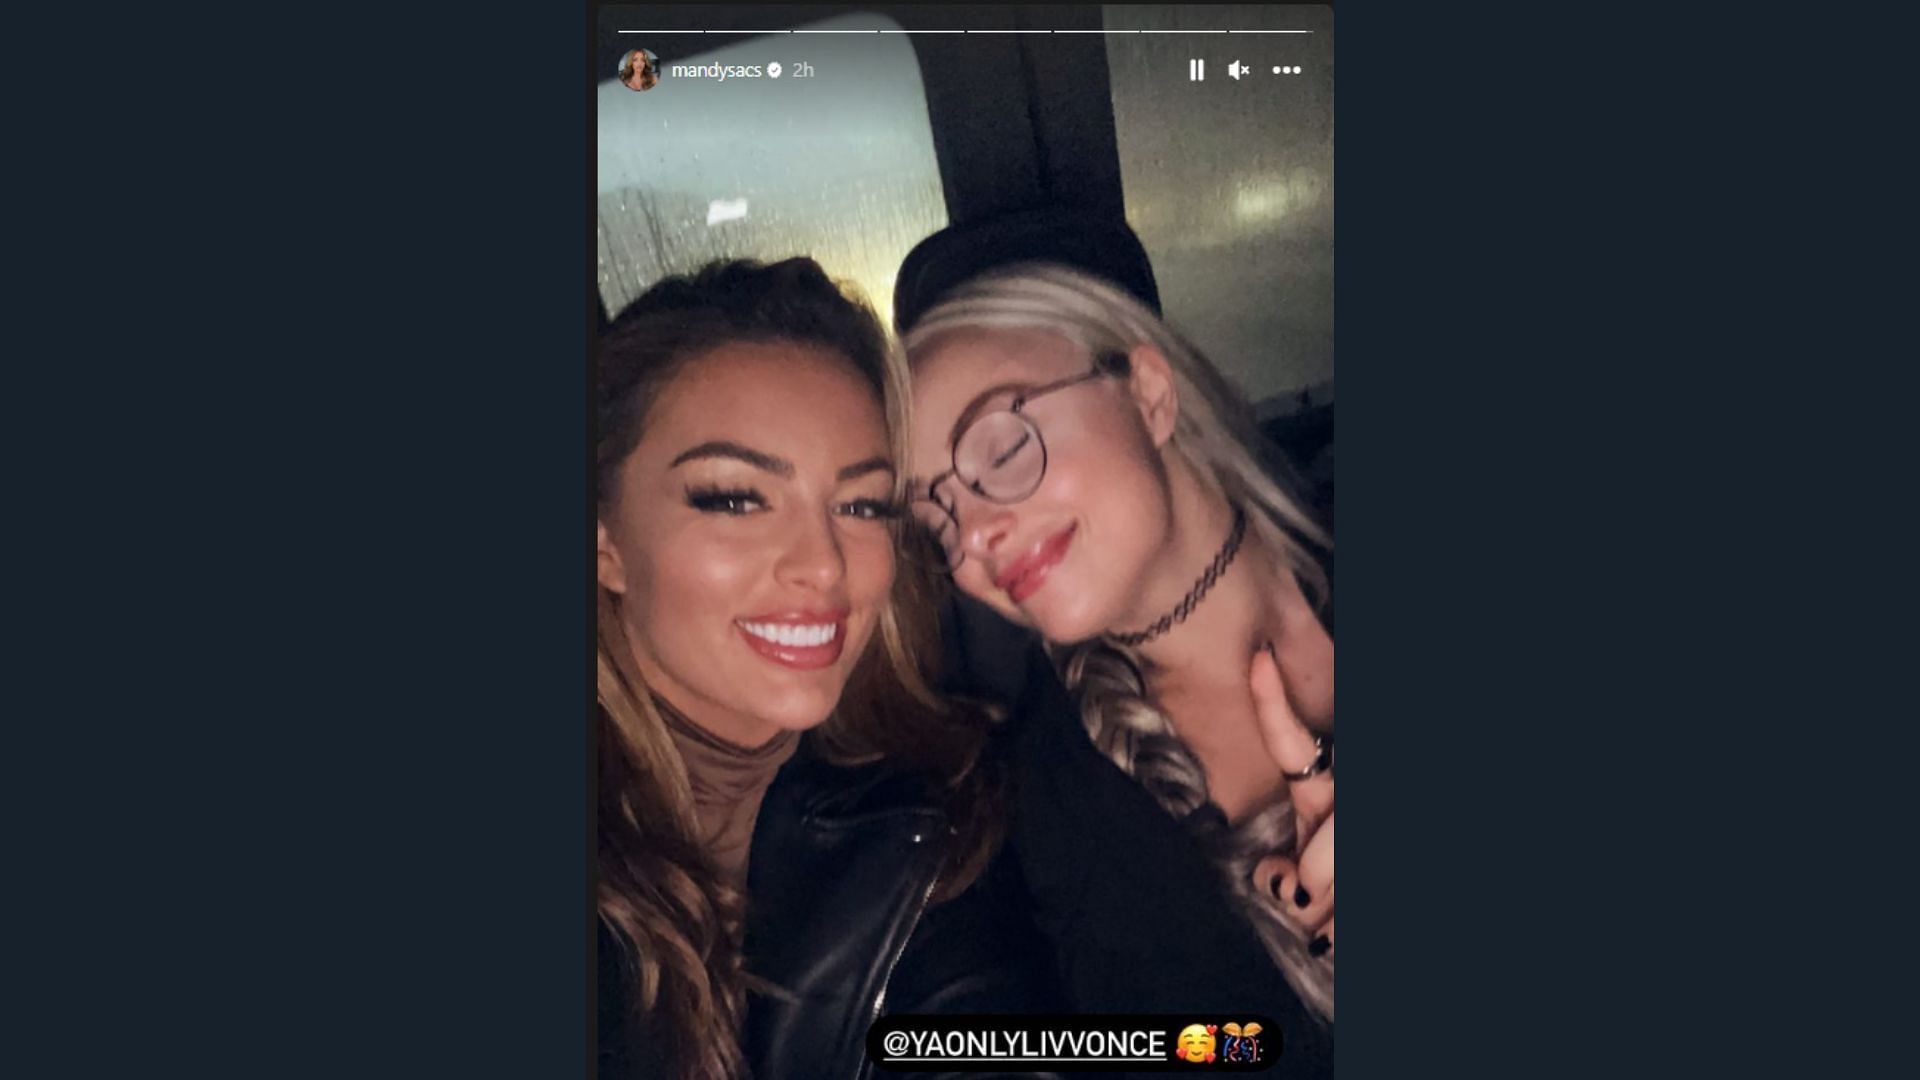 The picture posted with Liv Morgan on Instagram